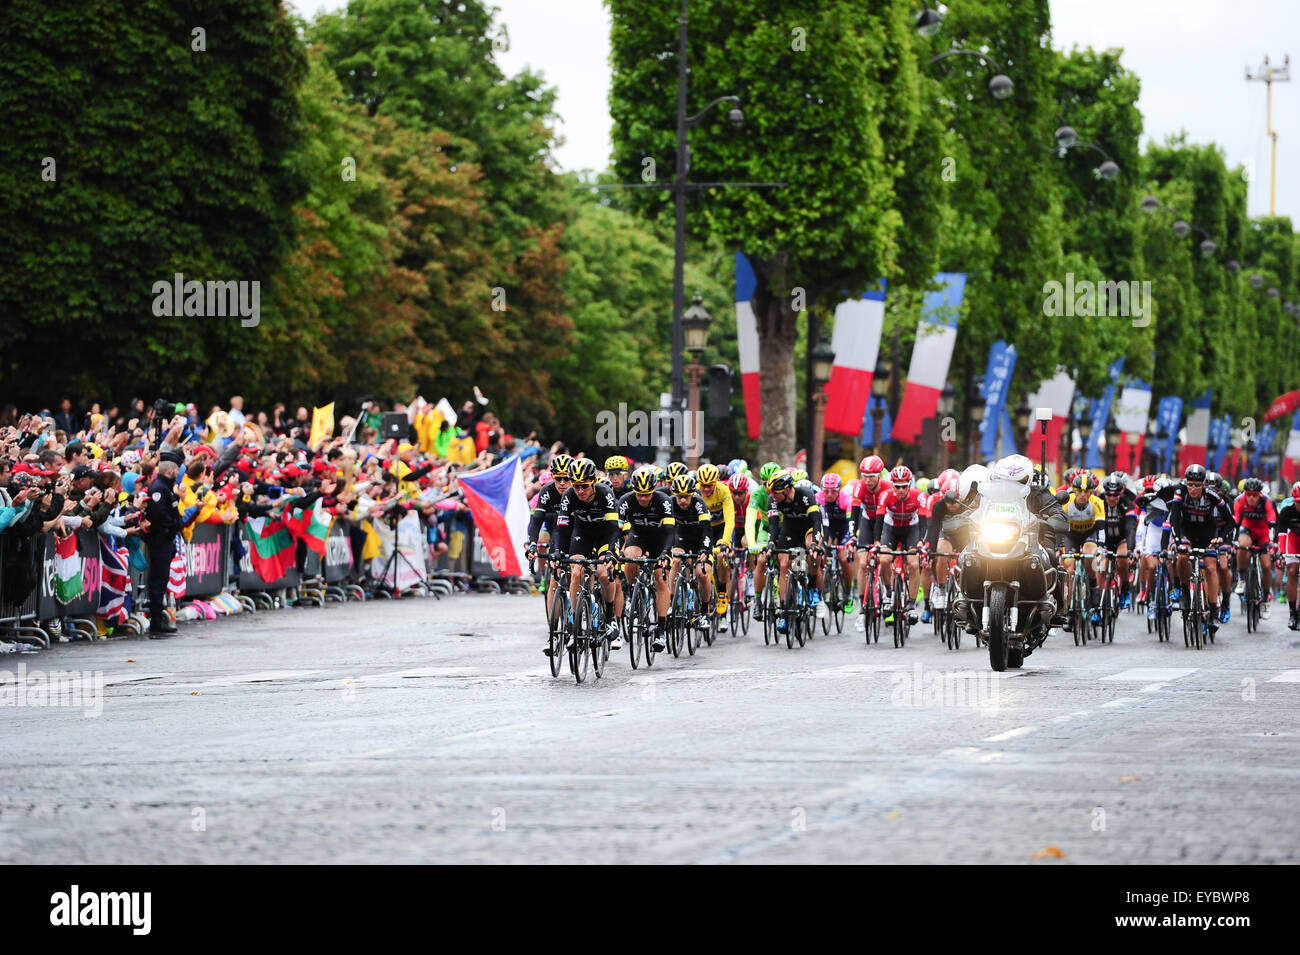 Paris, France. July 26, 2015. The riders passing along the Champs Elysees during Stage 21 of Tour de France in Paris. Photo: Miroslav Dakov/ Alamy Live News Stock Photo